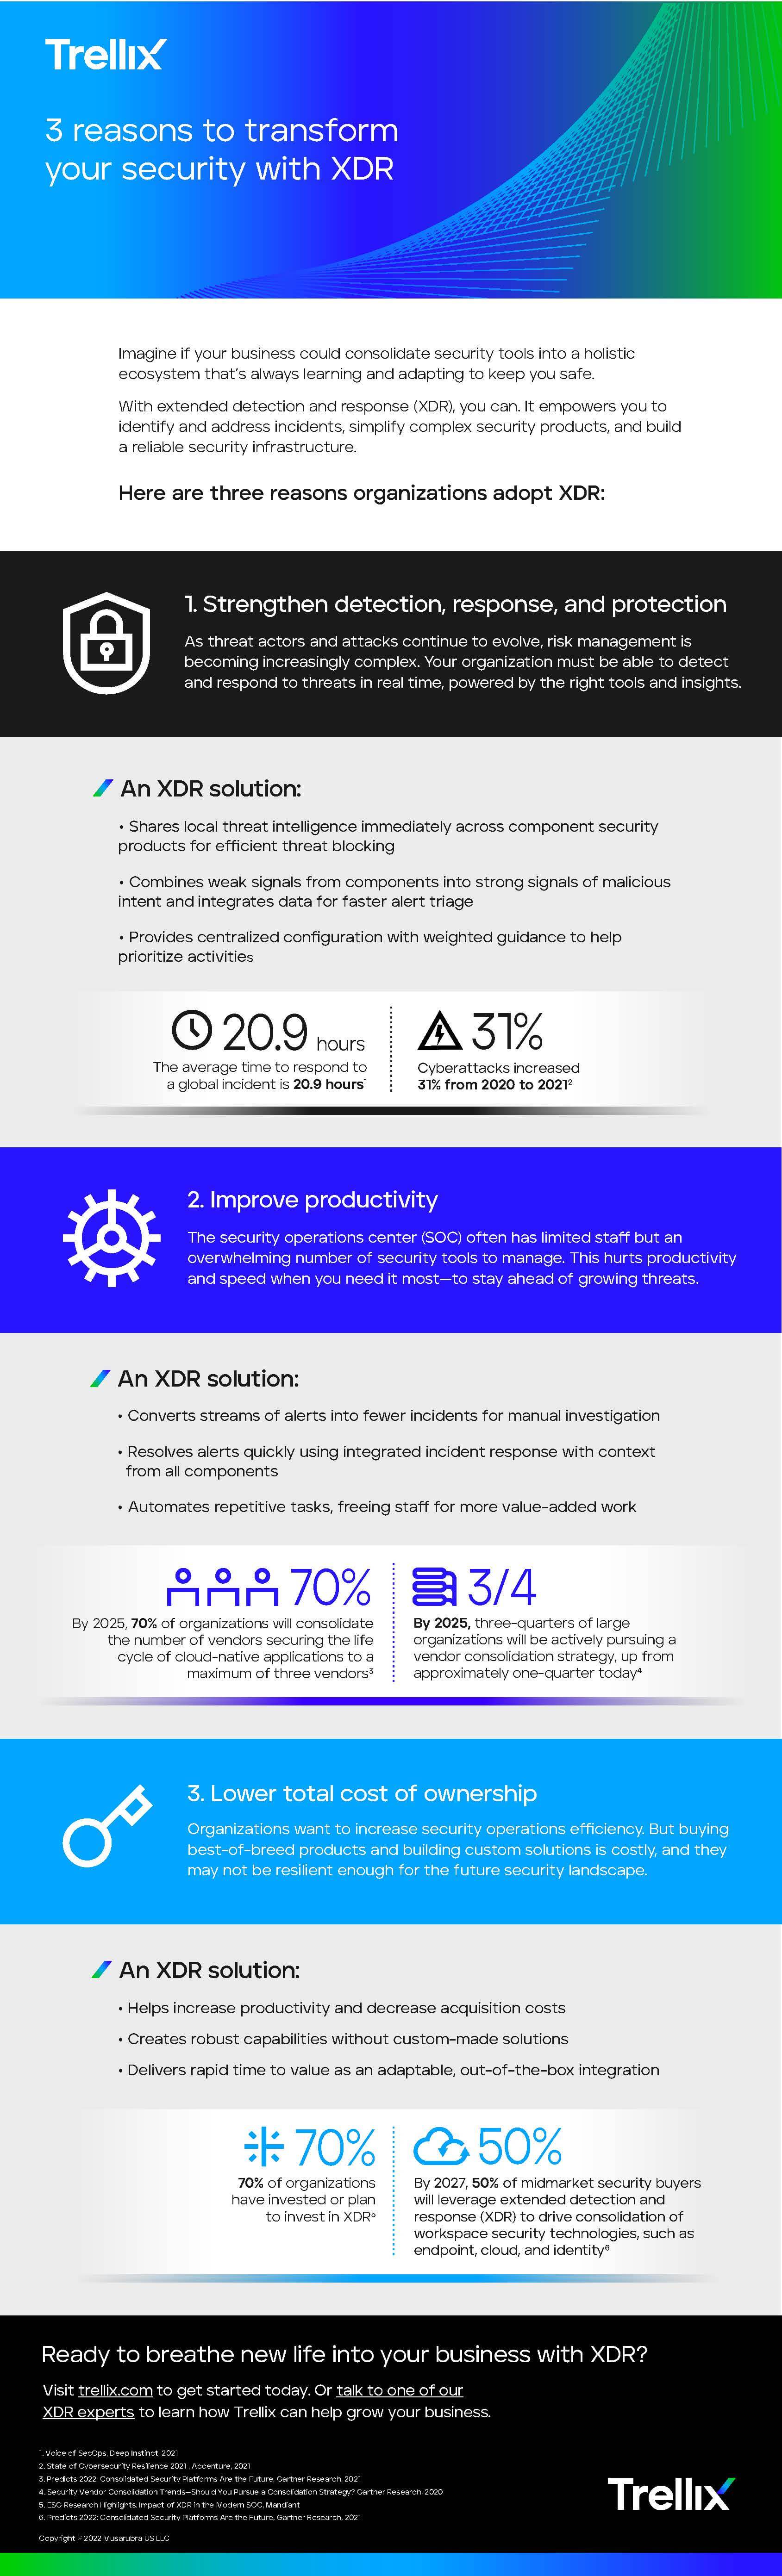 3 Reasons to Transform Your Security With XDR infographic 